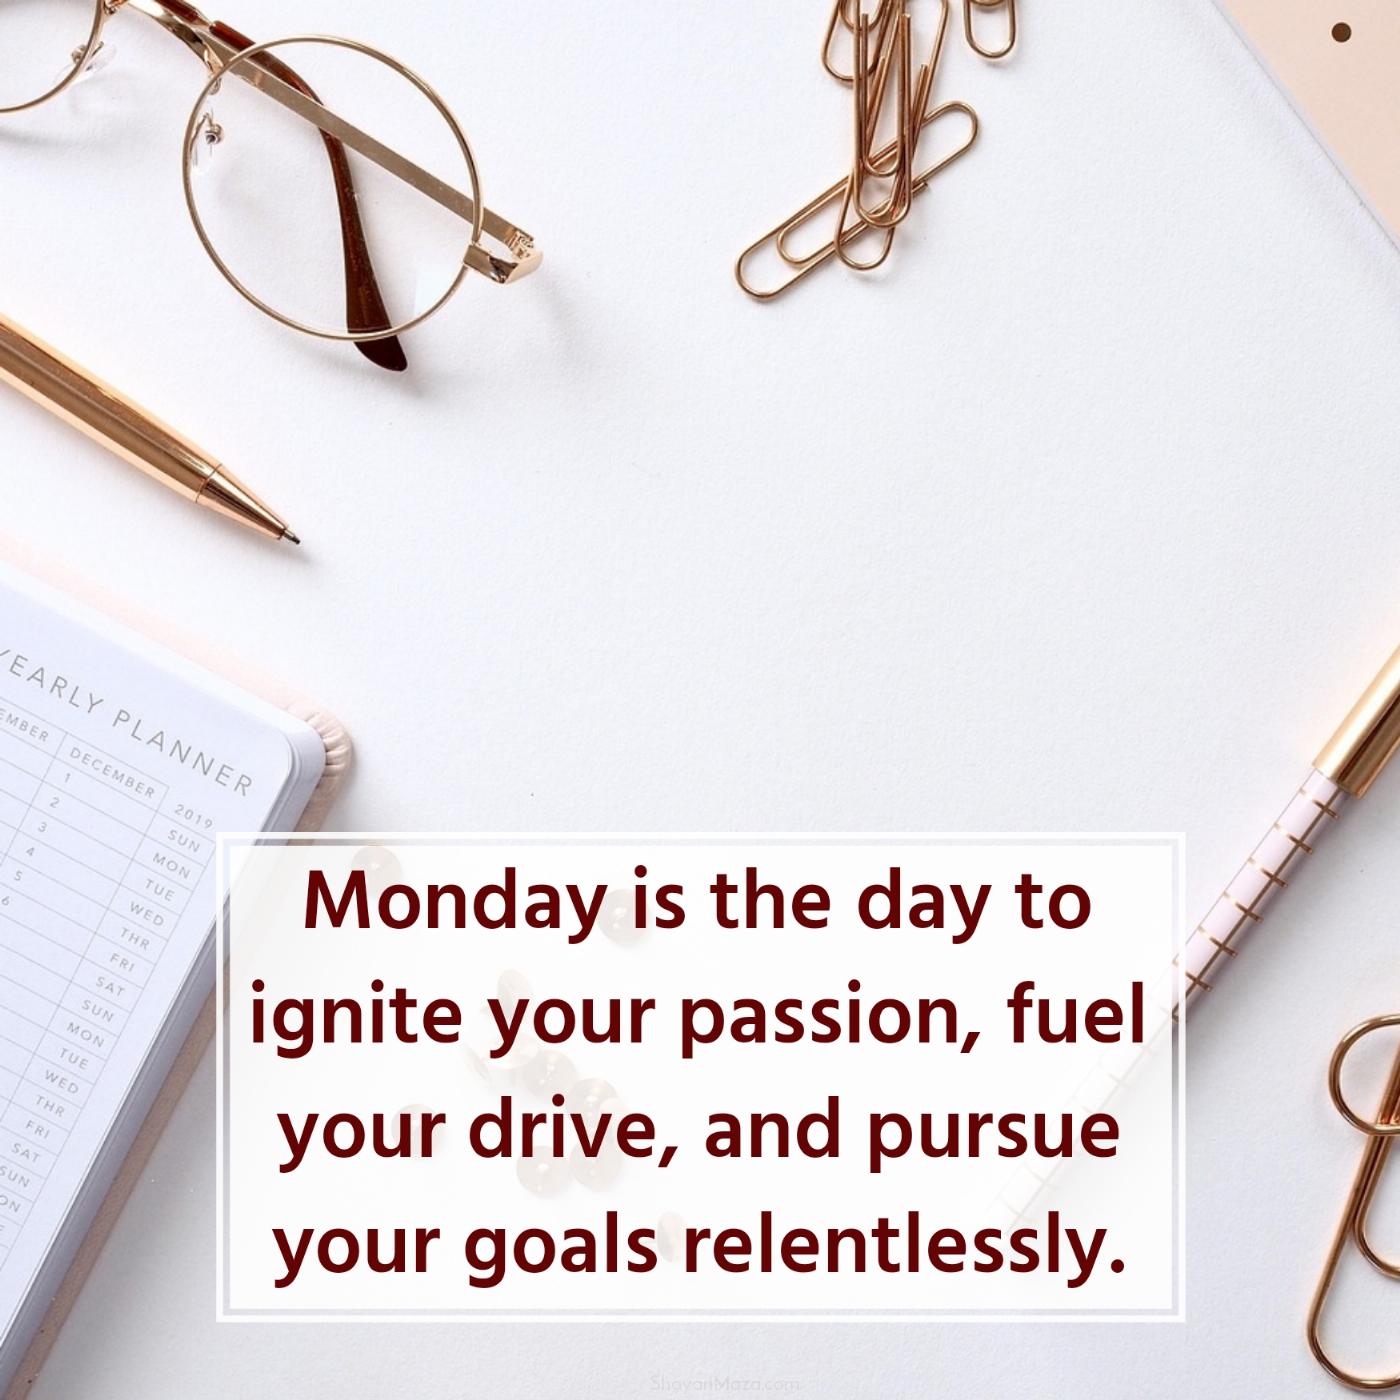 Monday is the day to ignite your passion